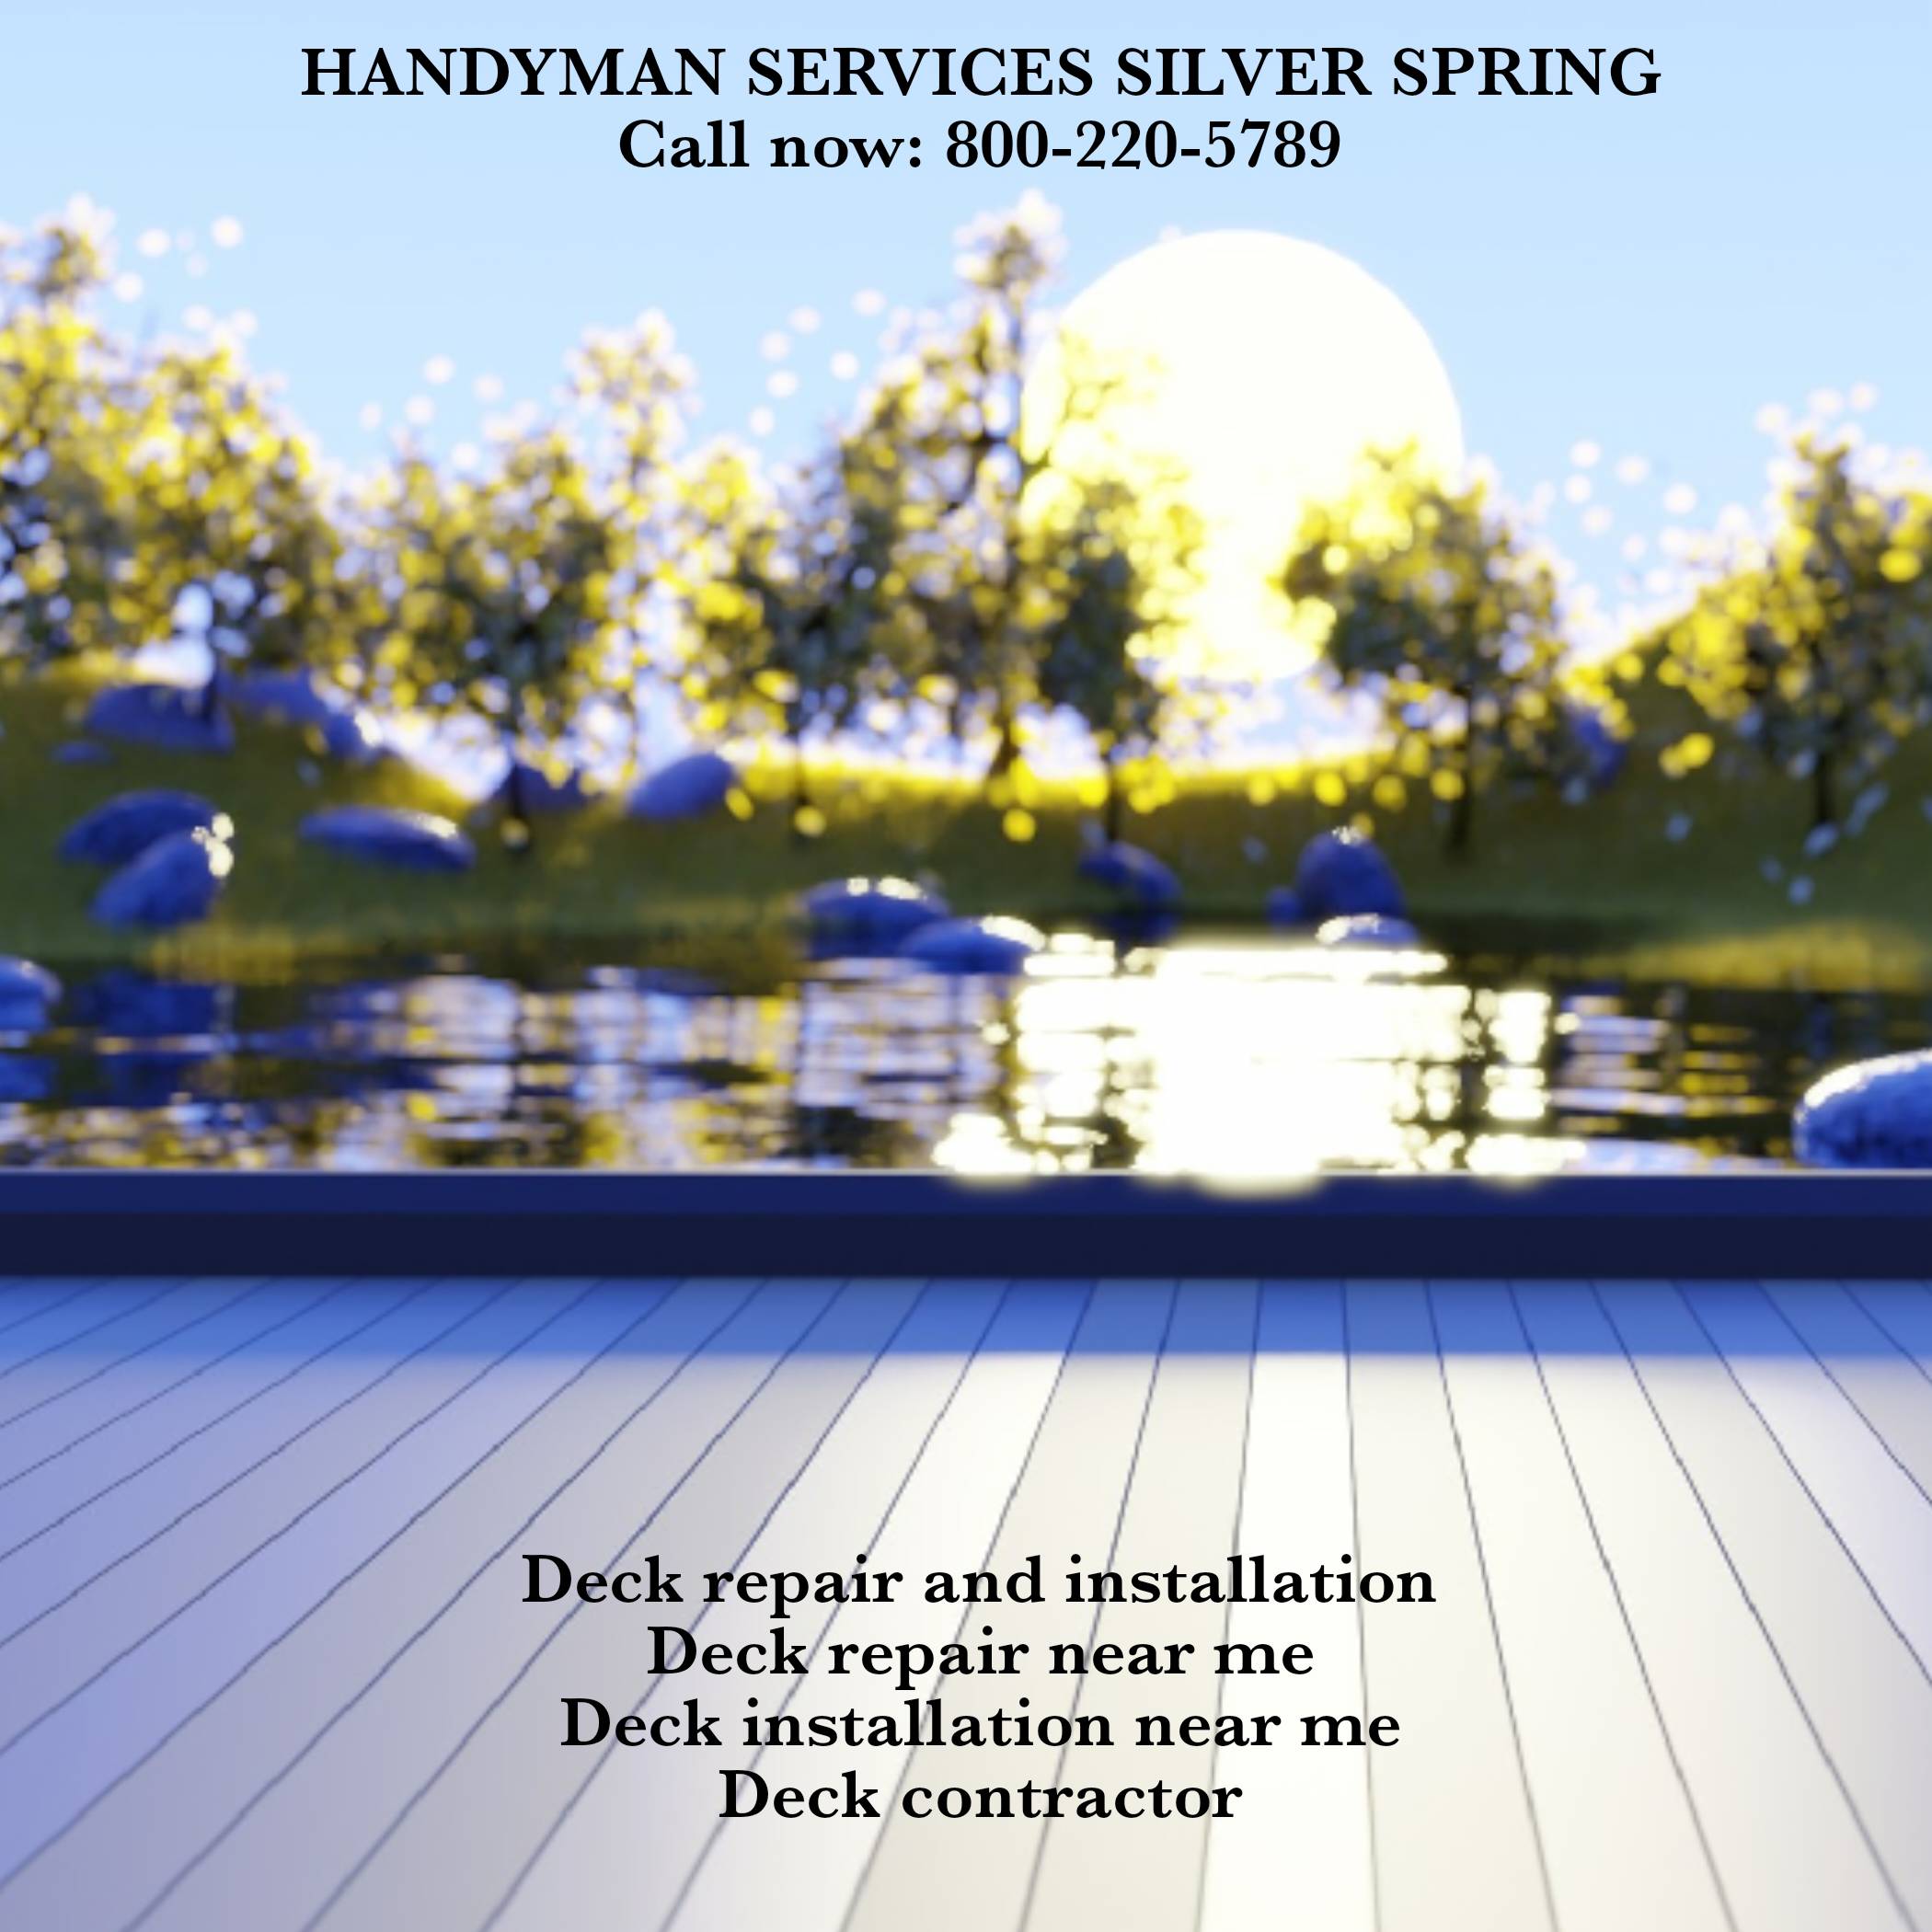 Enhancing Outdoor Living with Professional Deck Services